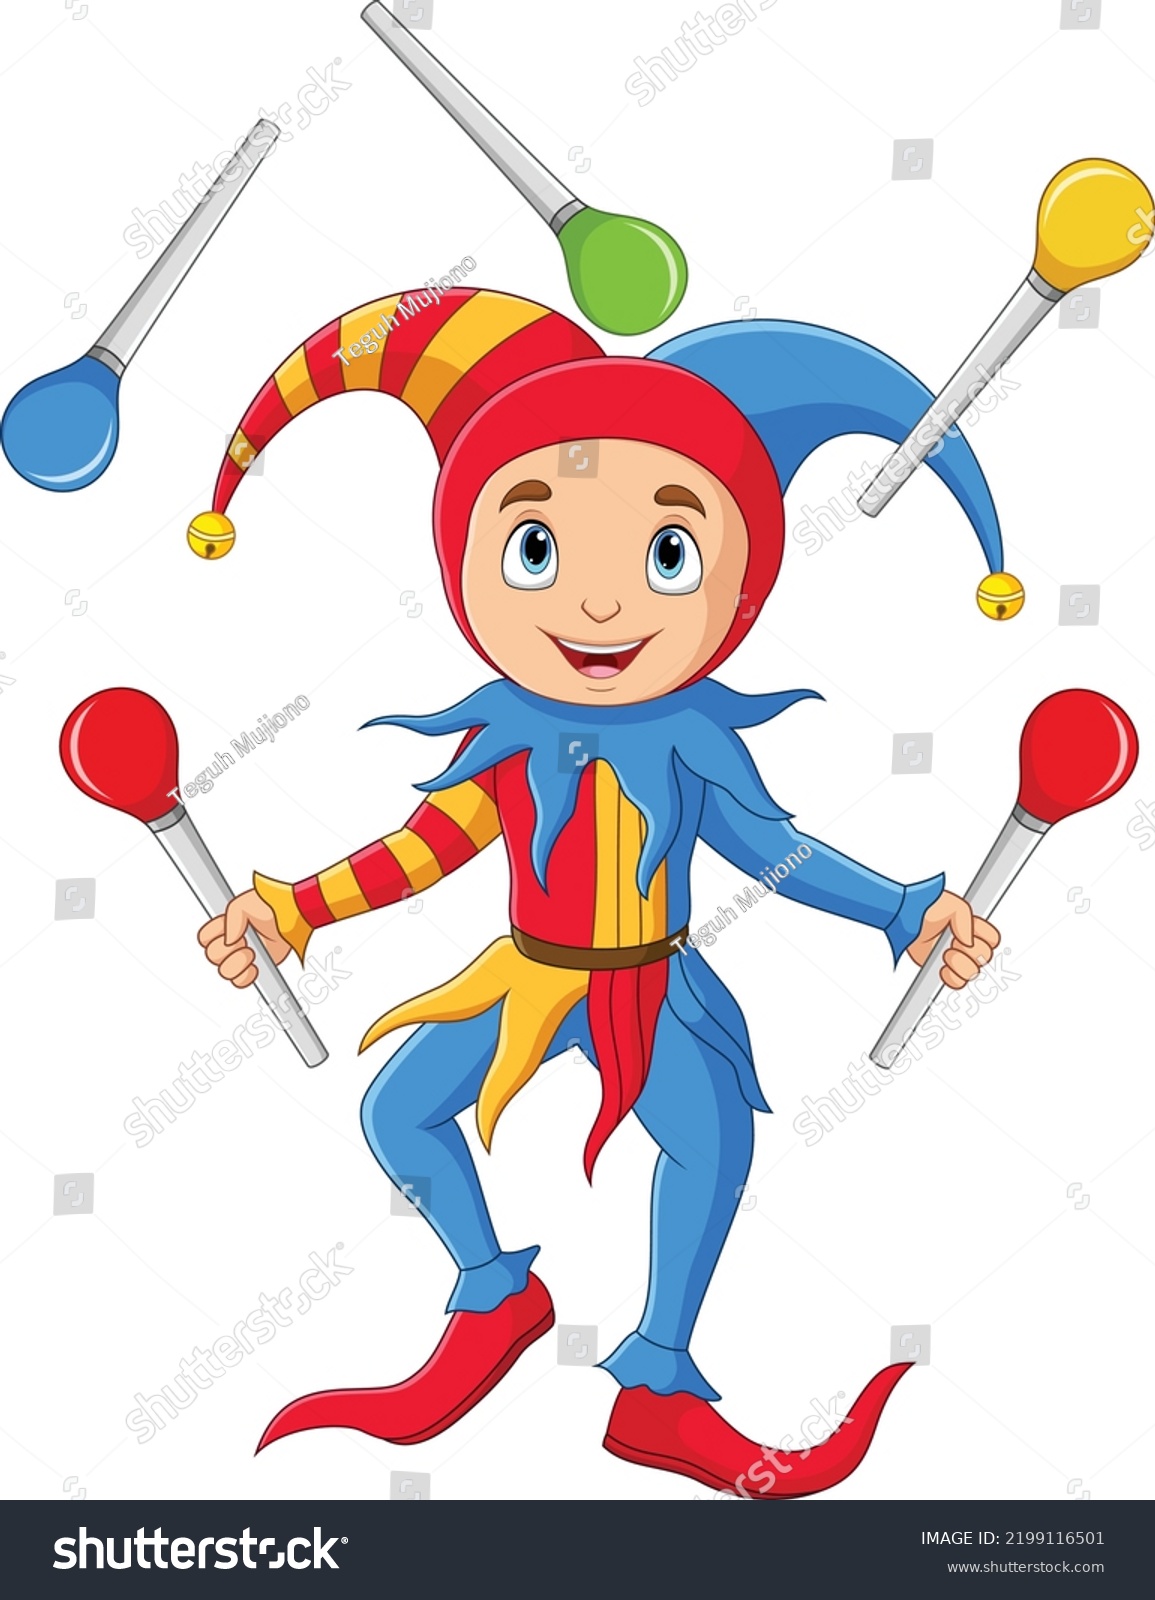 Cartoon Funny Jester Showing Juggling Stock Vector (Royalty Free ...